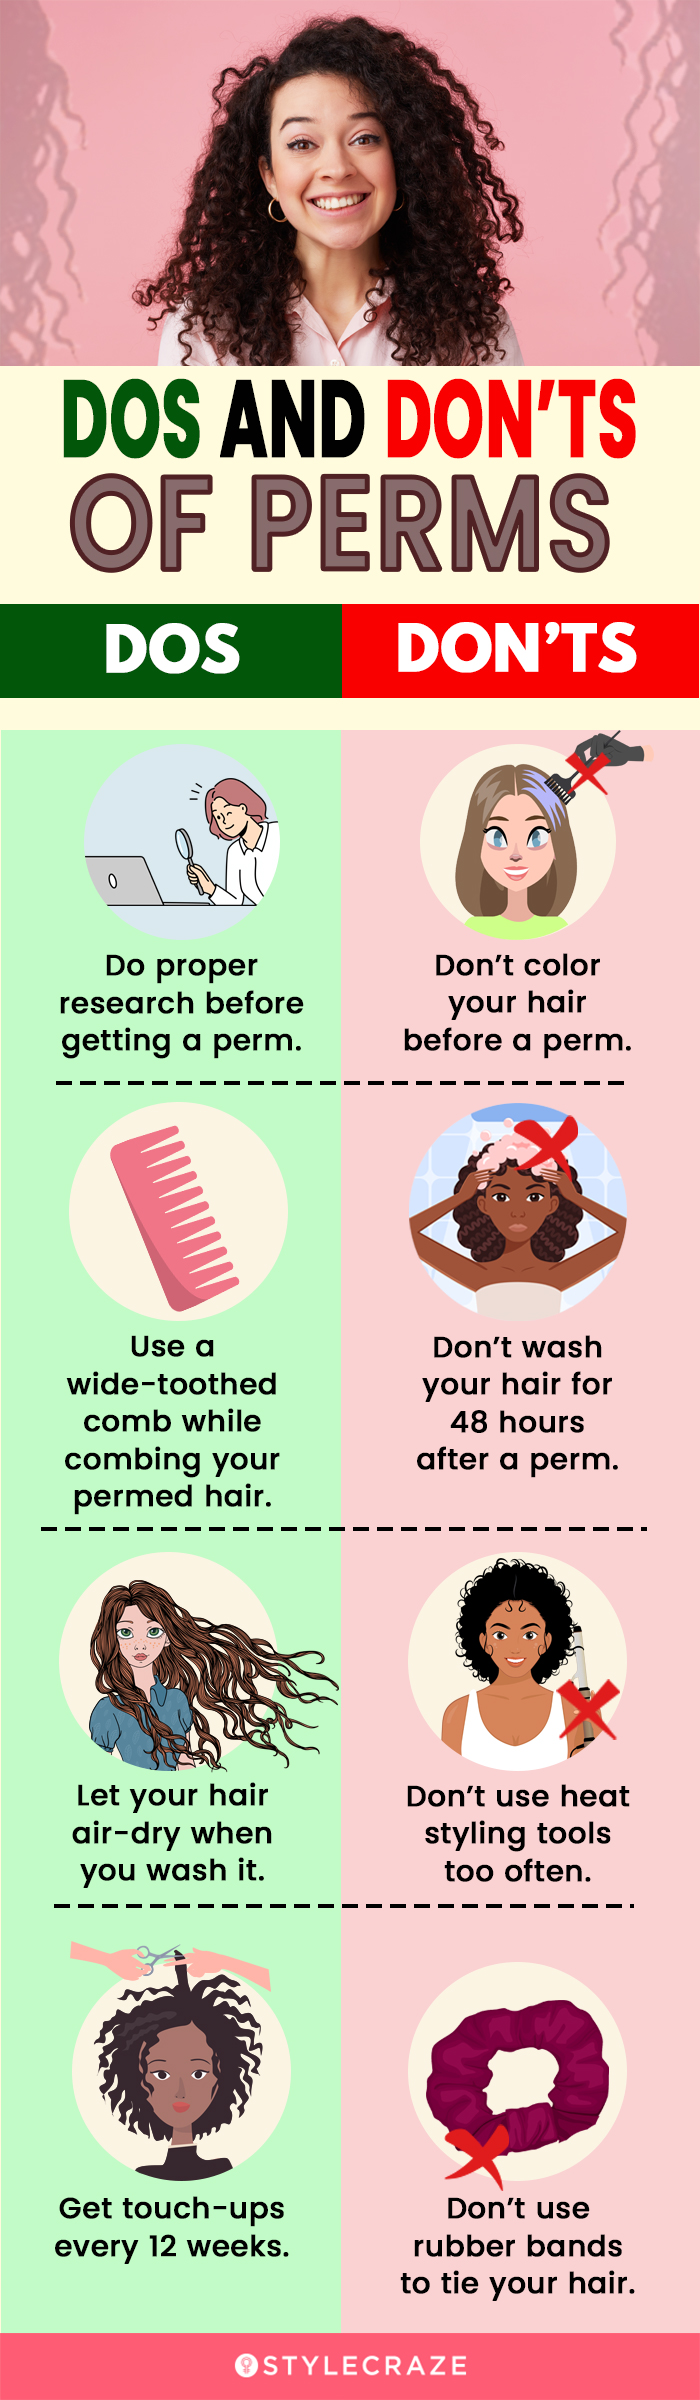 dos and don'ts of perms (infographic)